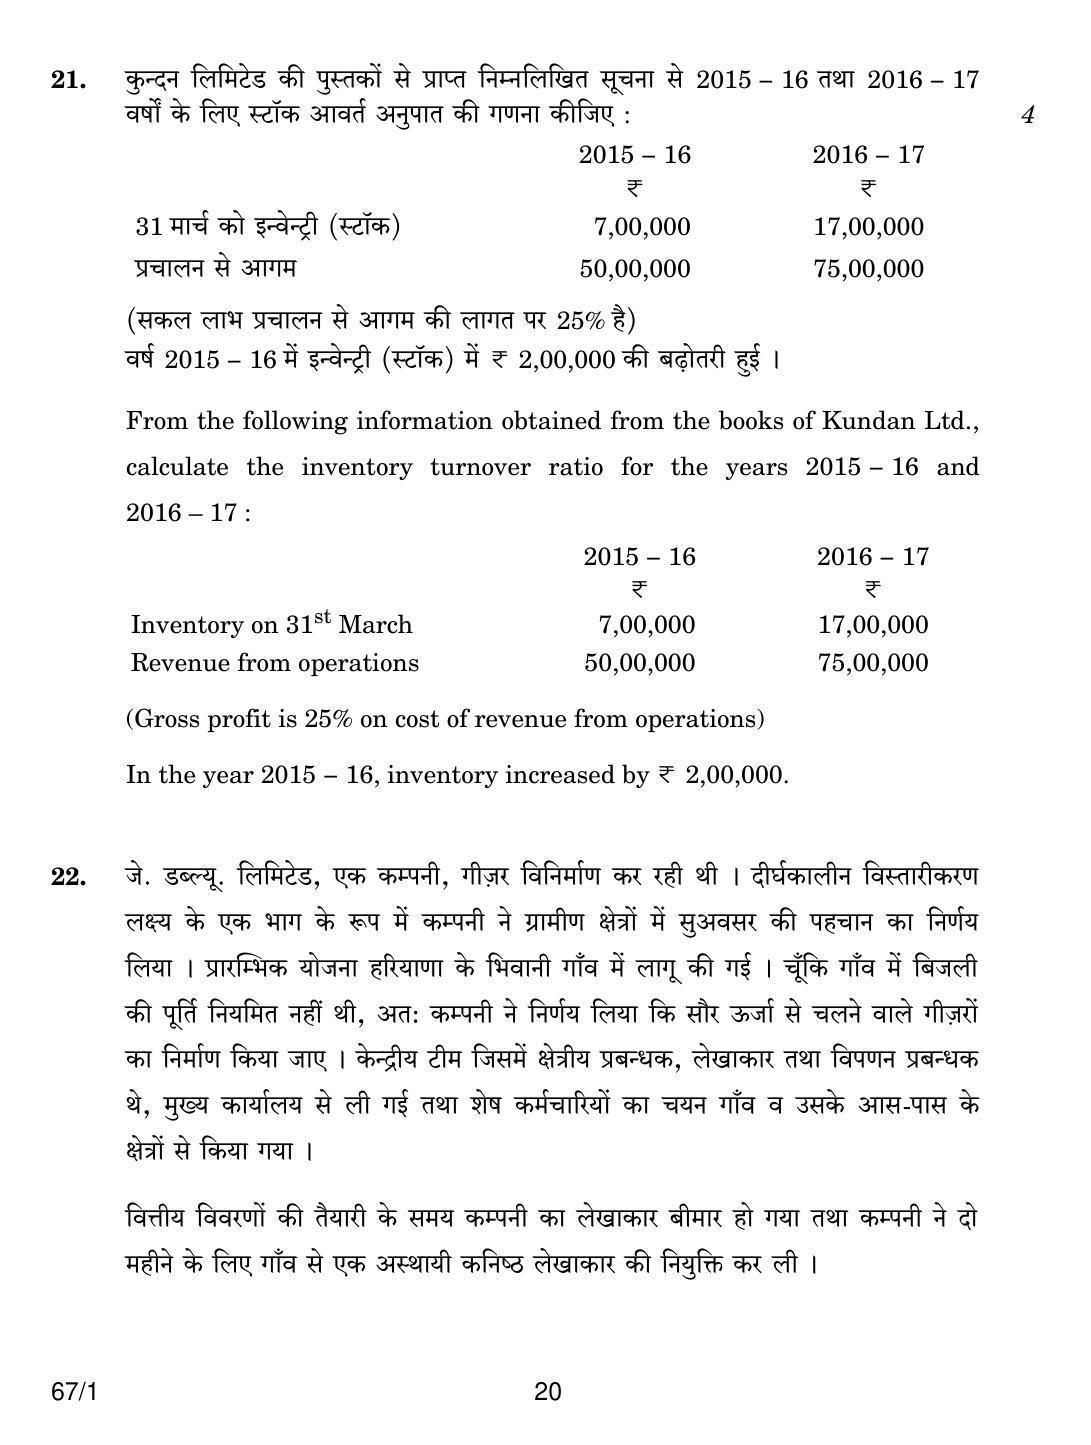 CBSE Class 12 67-1 ACCOUNTANCY 2018 Question Paper - Page 20